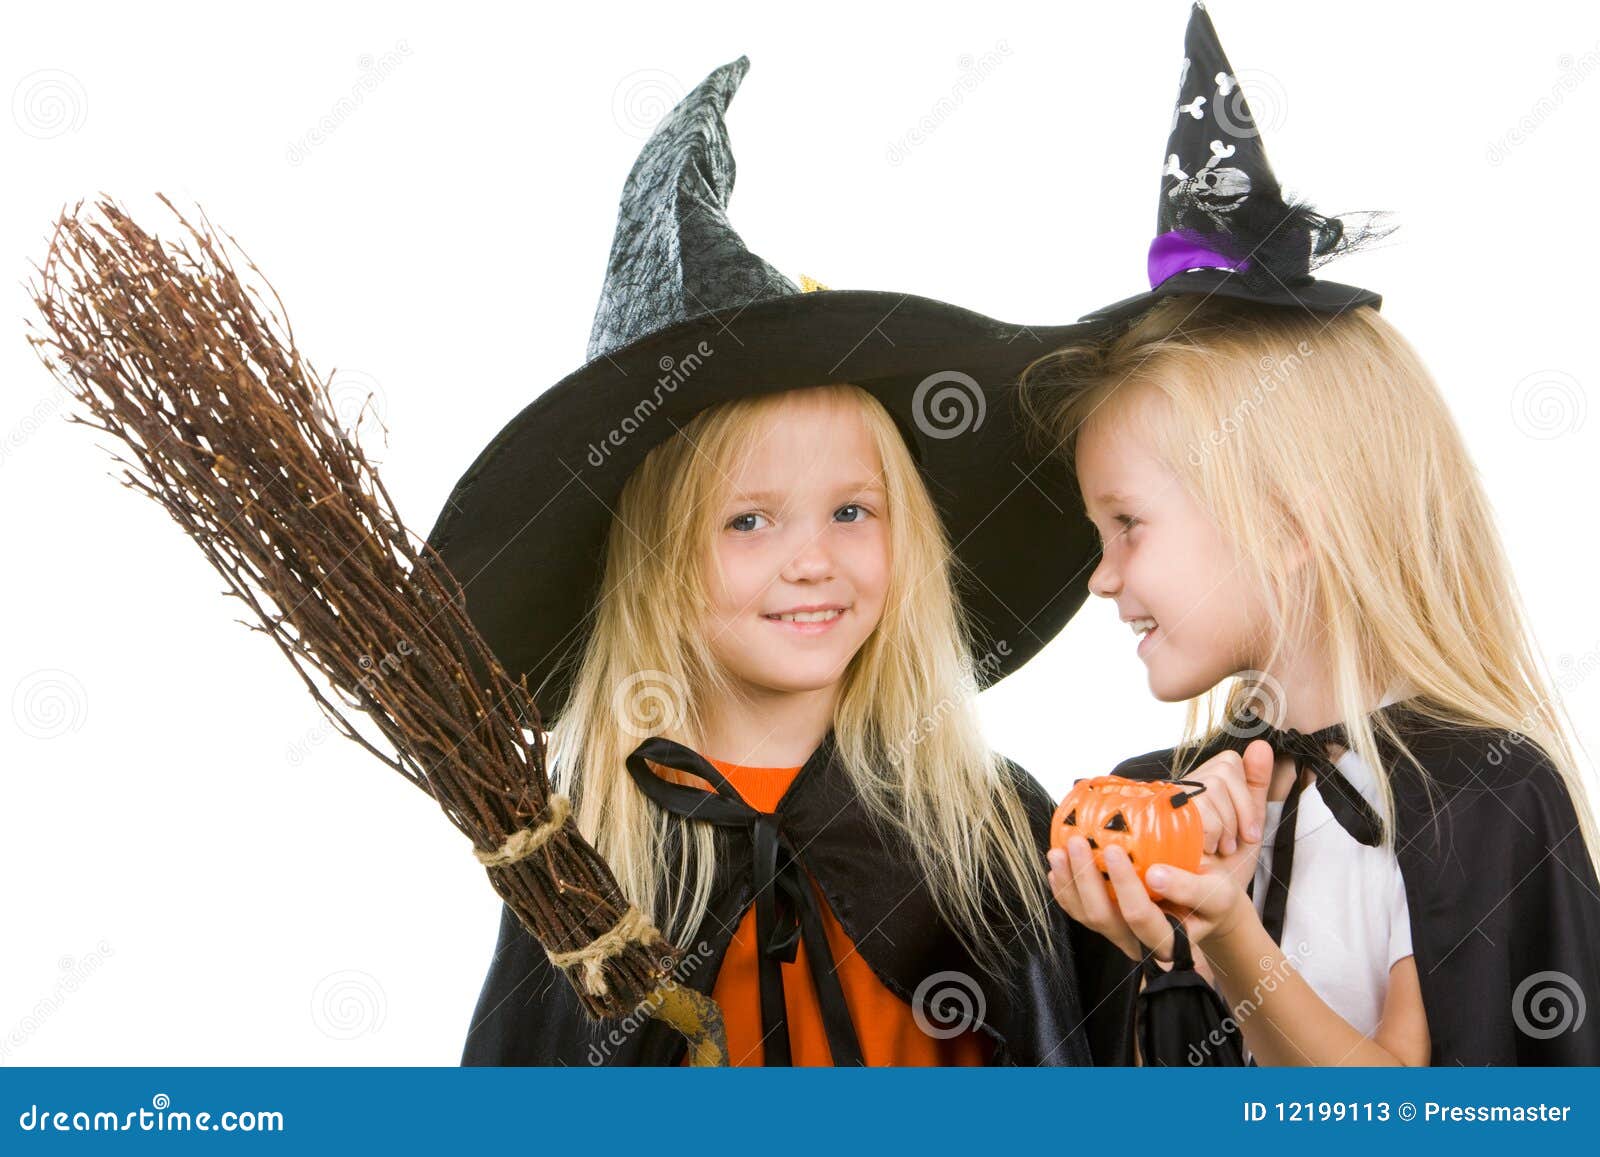 Two Girl Witches Stock Photos - Image: 12199113